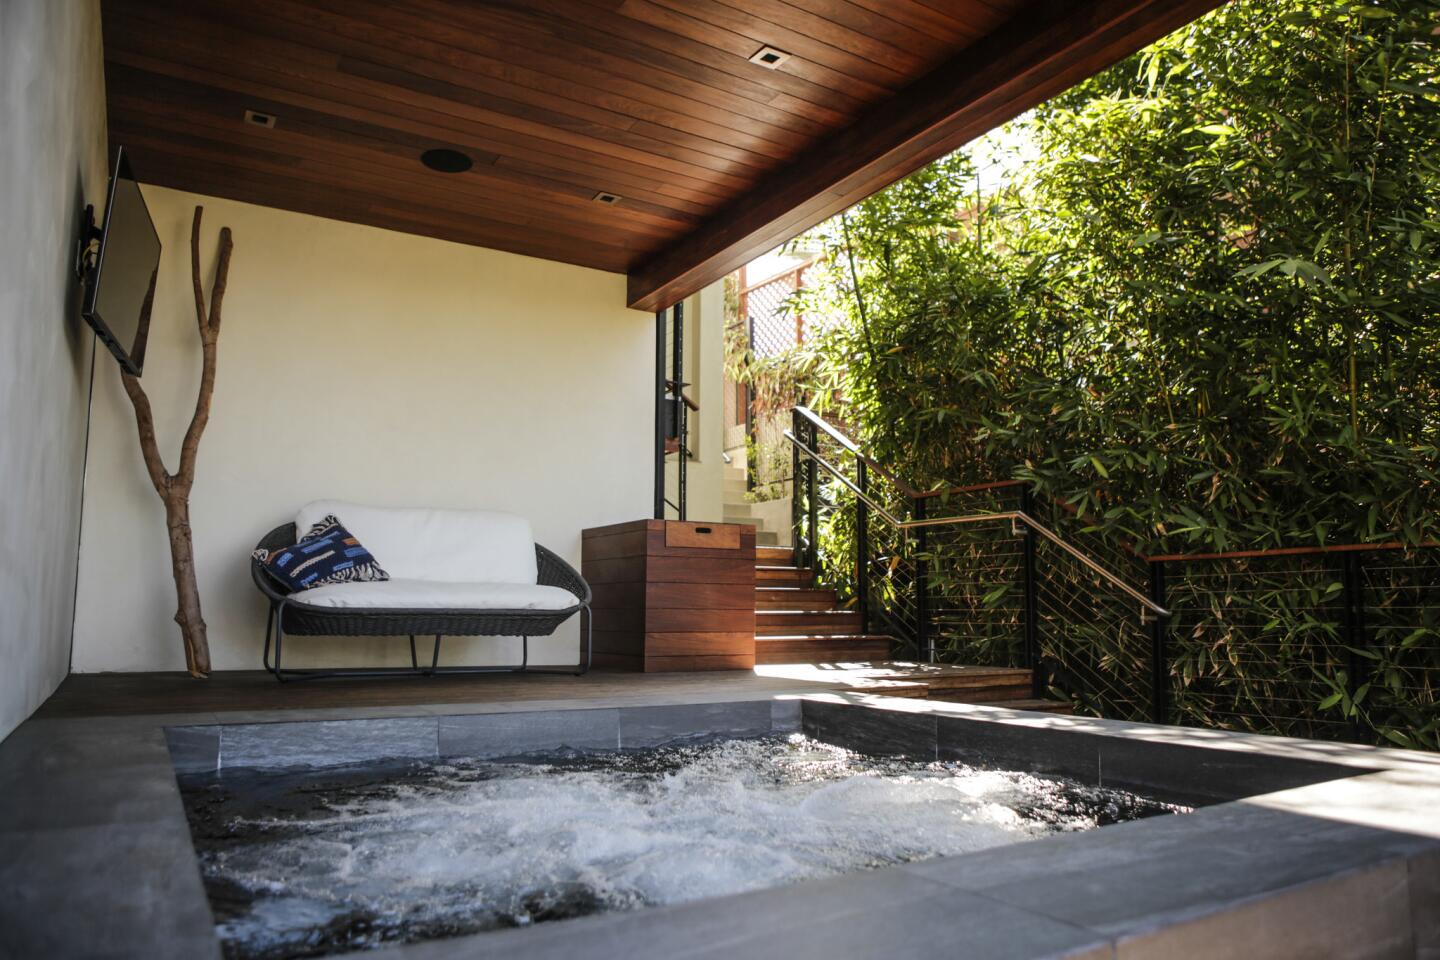 Designing a fire-resistant home in the Hollywood Hills